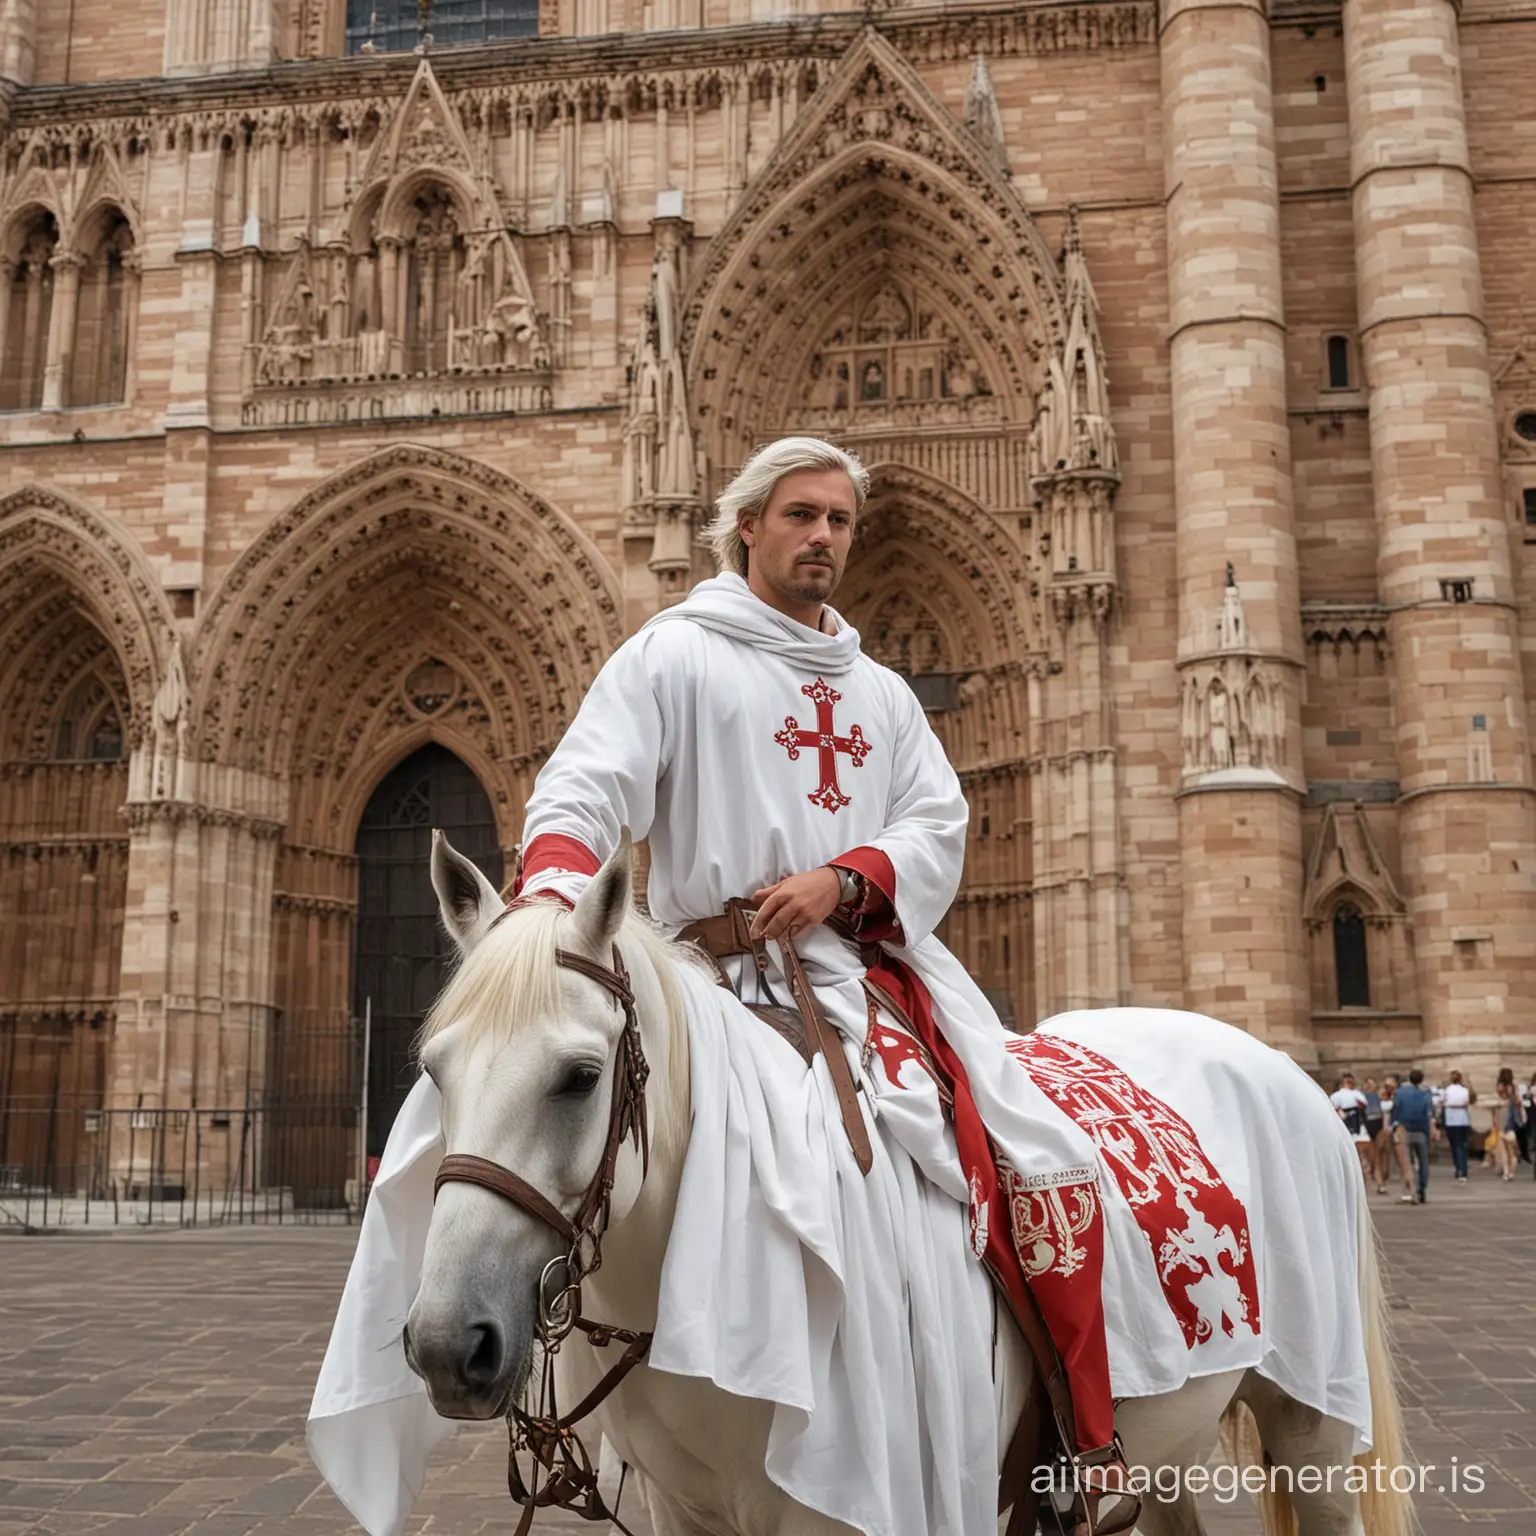 Cathar-Knight-Riding-Before-Albi-Cathedral-White-Robed-Warrior-in-Occitan-Cross